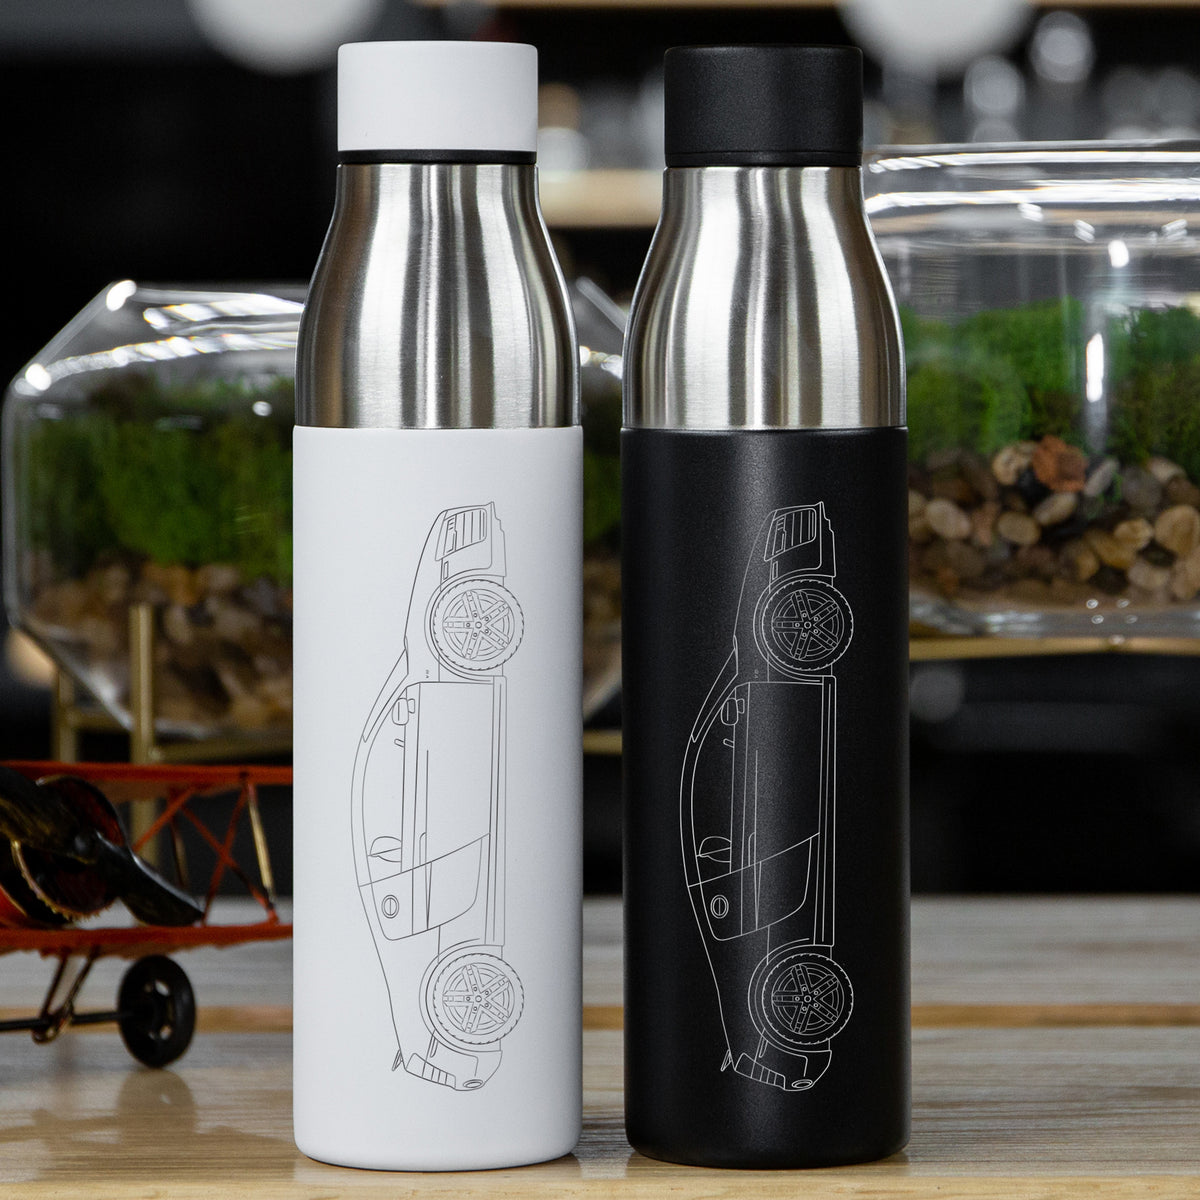 Audi R8 Insulated Stainless Steel Water Bottle - 21 oz